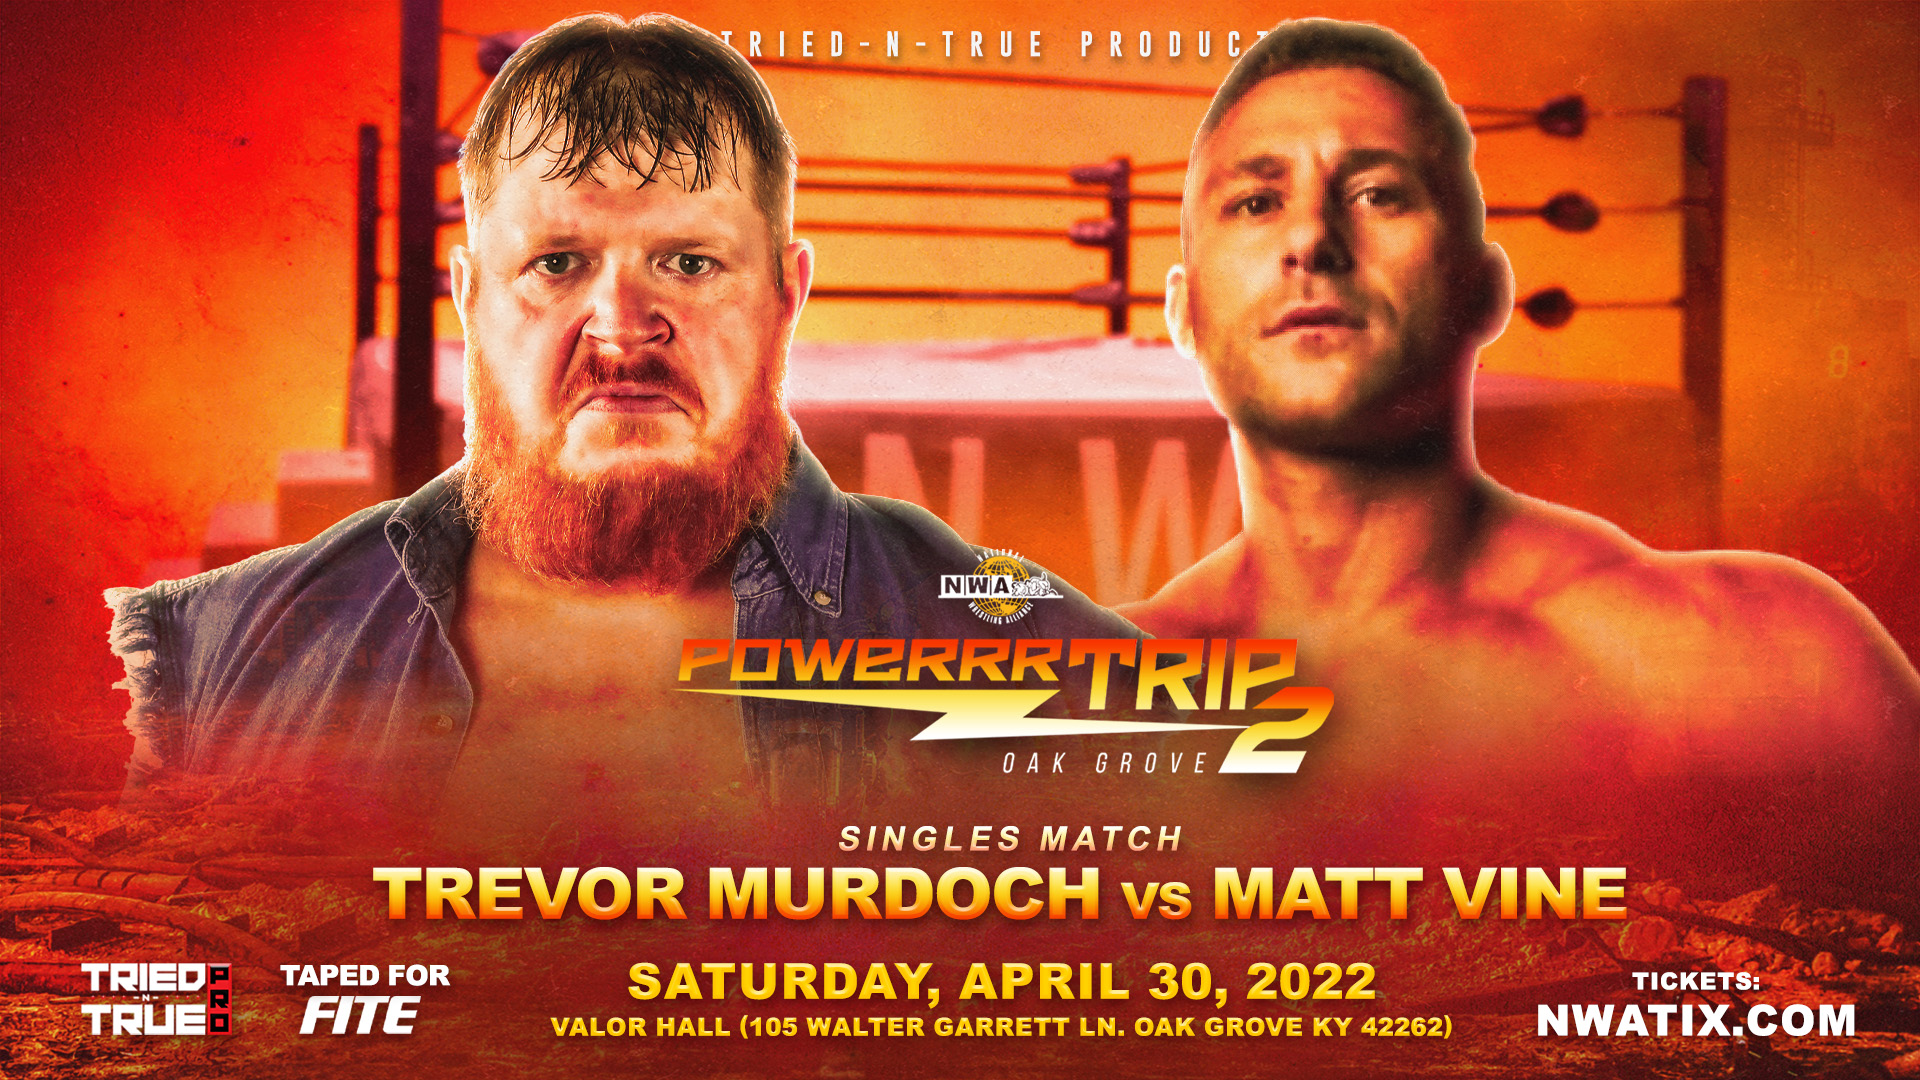 New Match Announced For NWA Powerrr Trip 2 Event